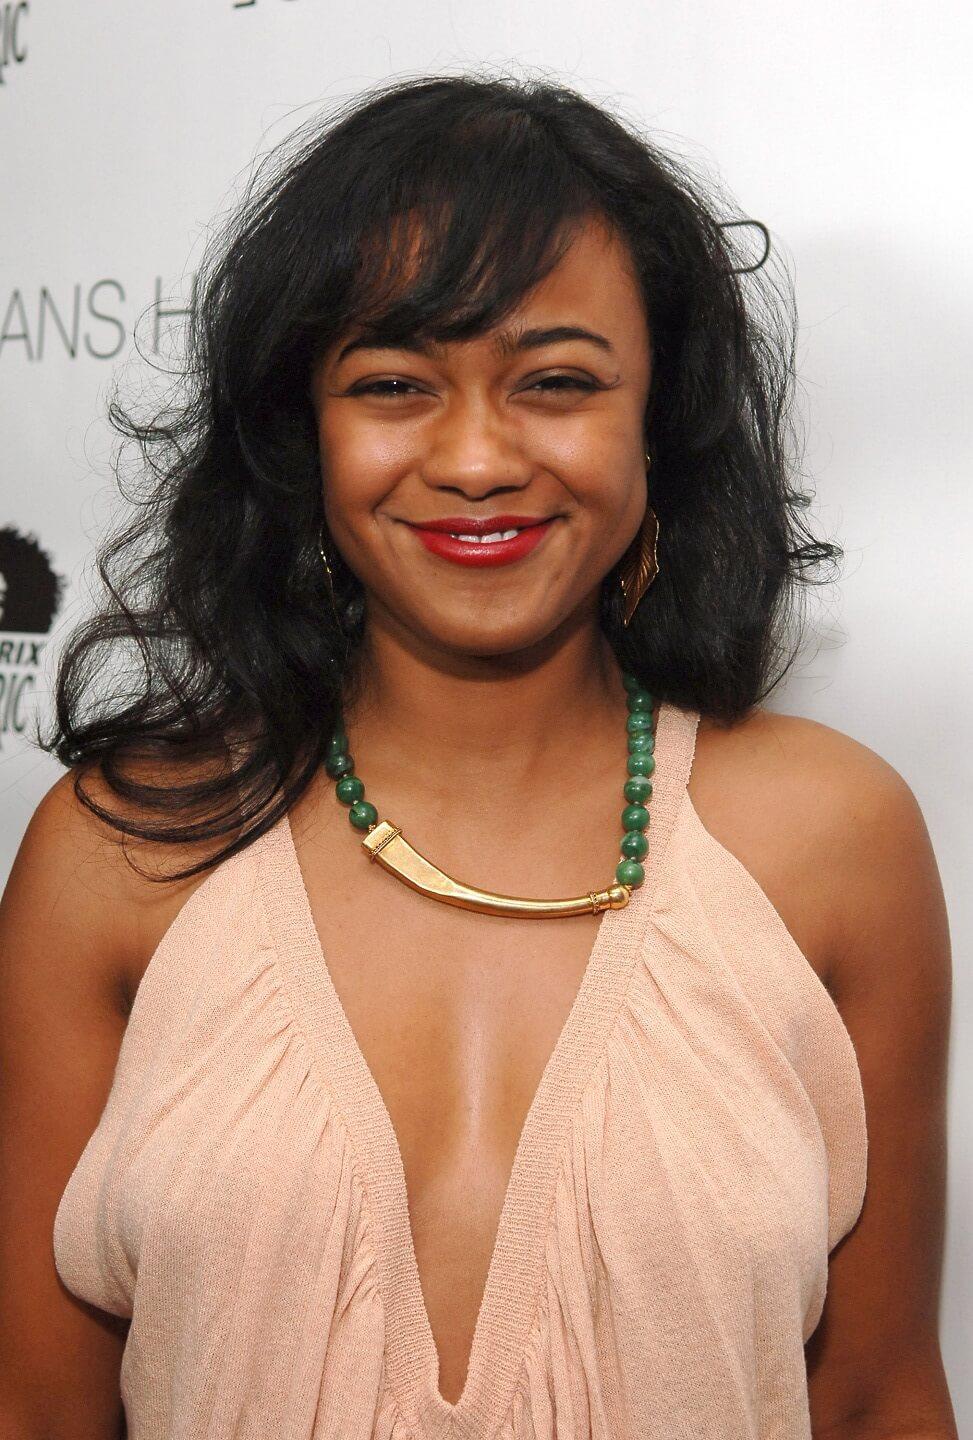 49 Hottest Tatyana Ali Bikini Pictures Are So Damn Sexy That We Don’t Deserve Her | Best Of Comic Books